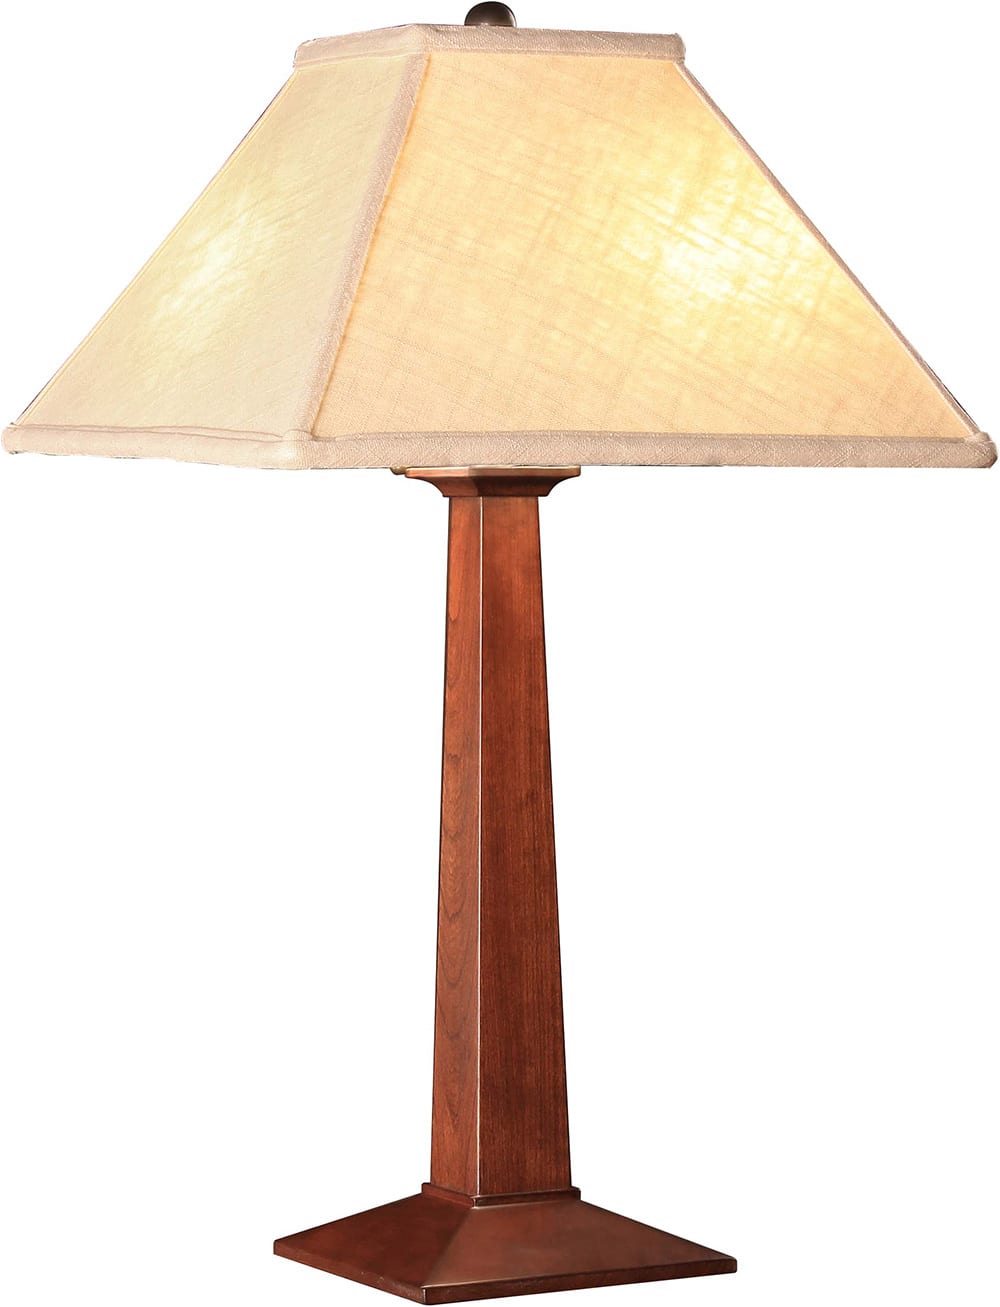 Table Lamp with Linen Shade - Stickley Brand